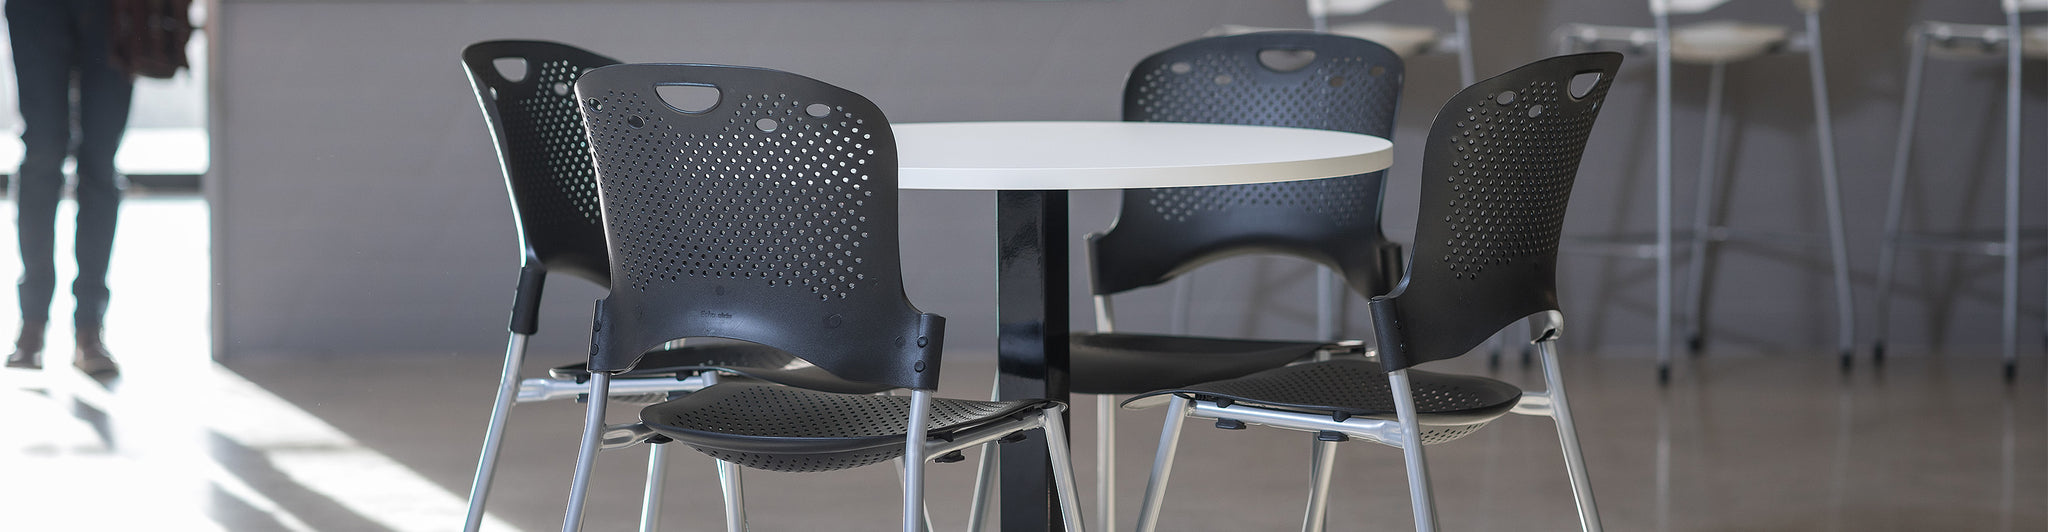 Multi-Use Office Chairs